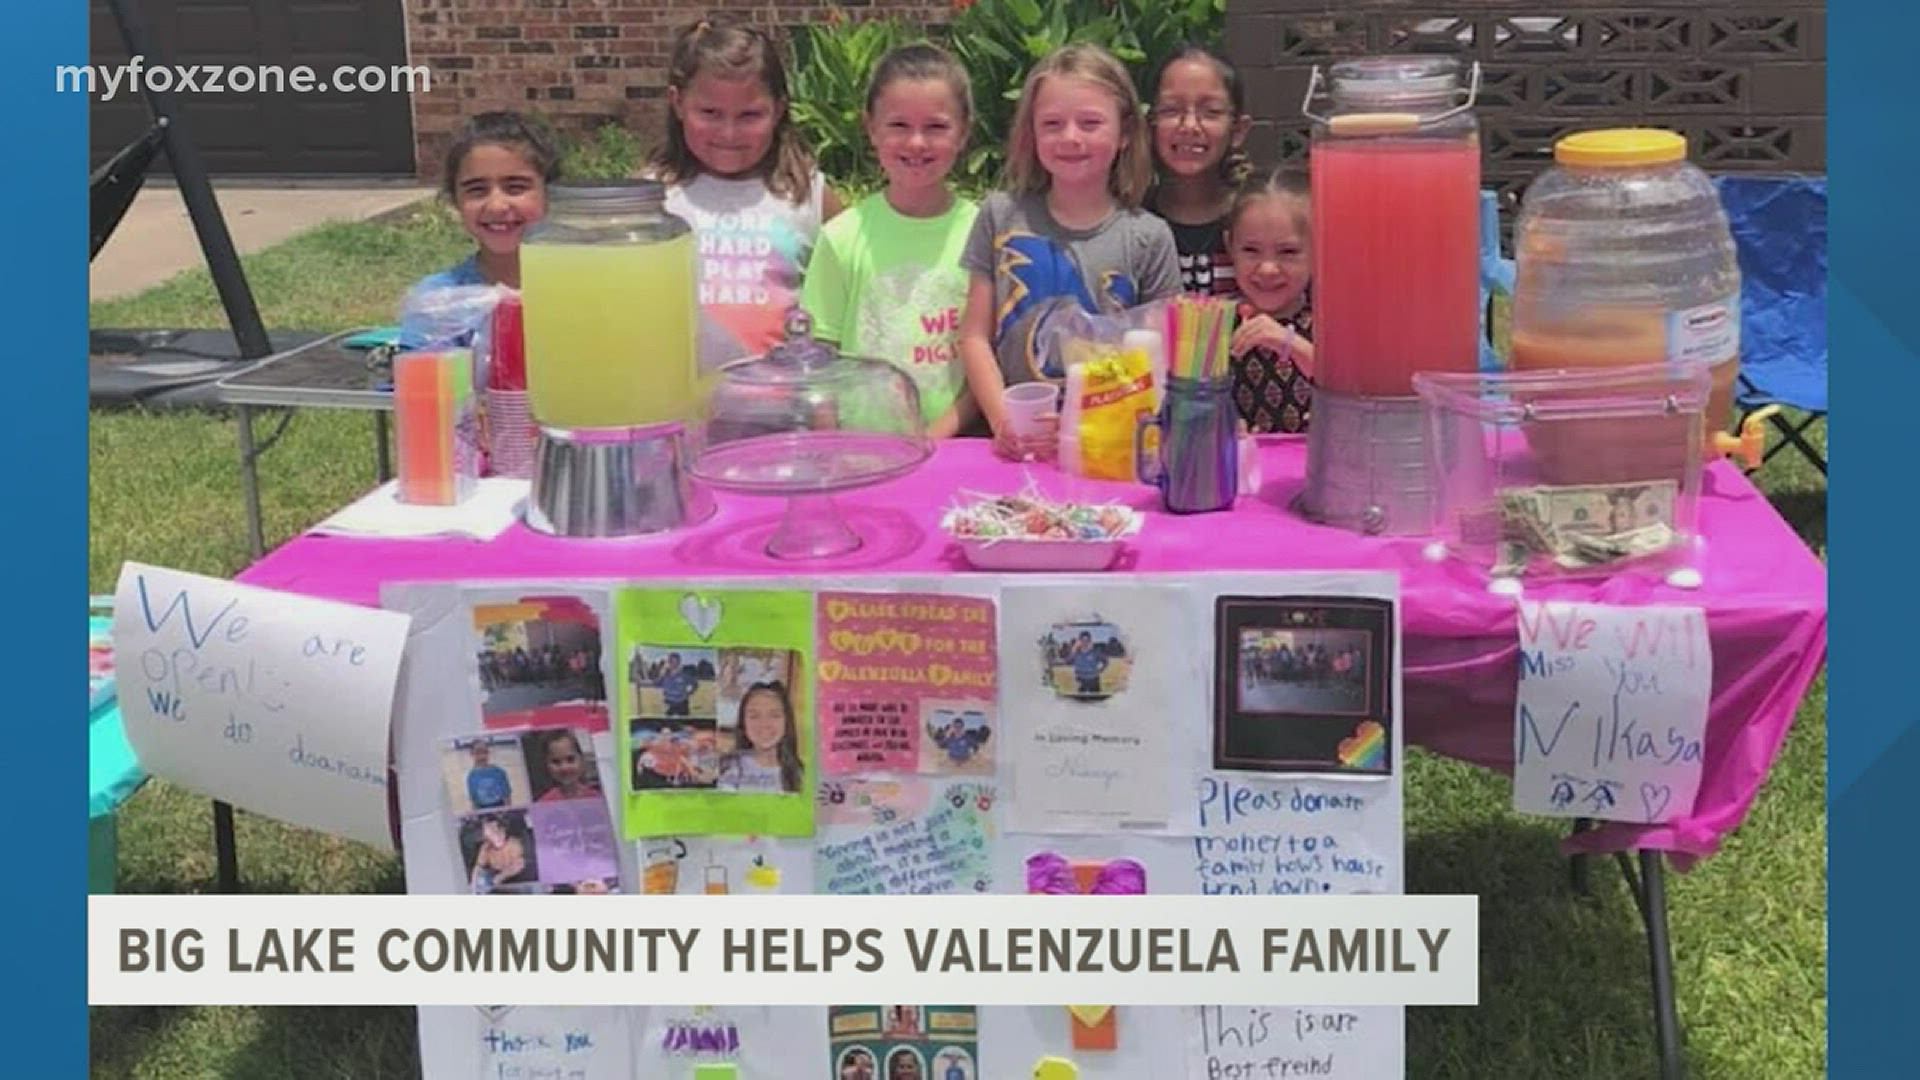 The Valenzuela family lost their home and 8-year-old daughter in house fire Monday, June 28.